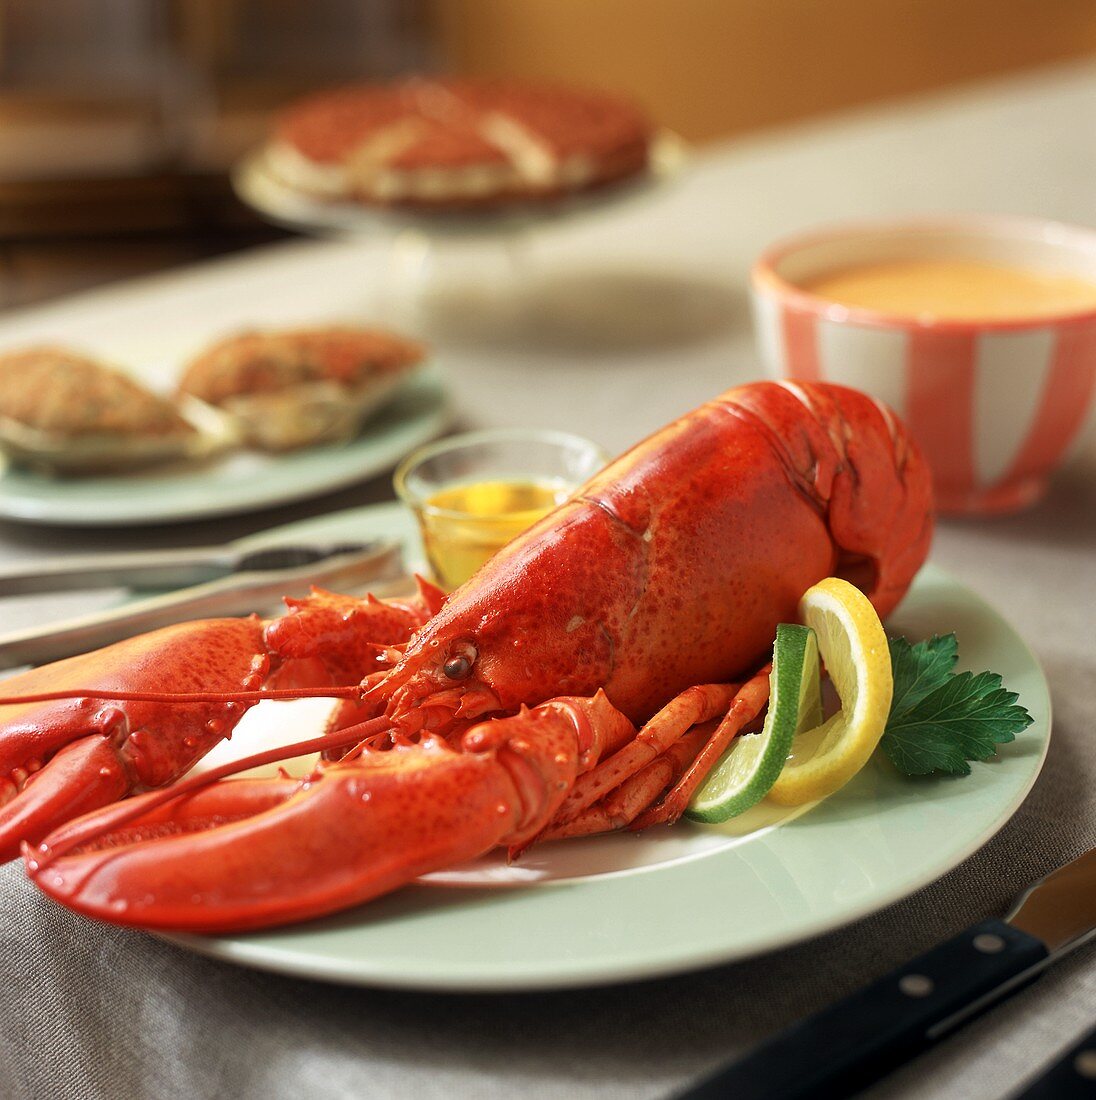 Cooked lobster with melted butter and lemon